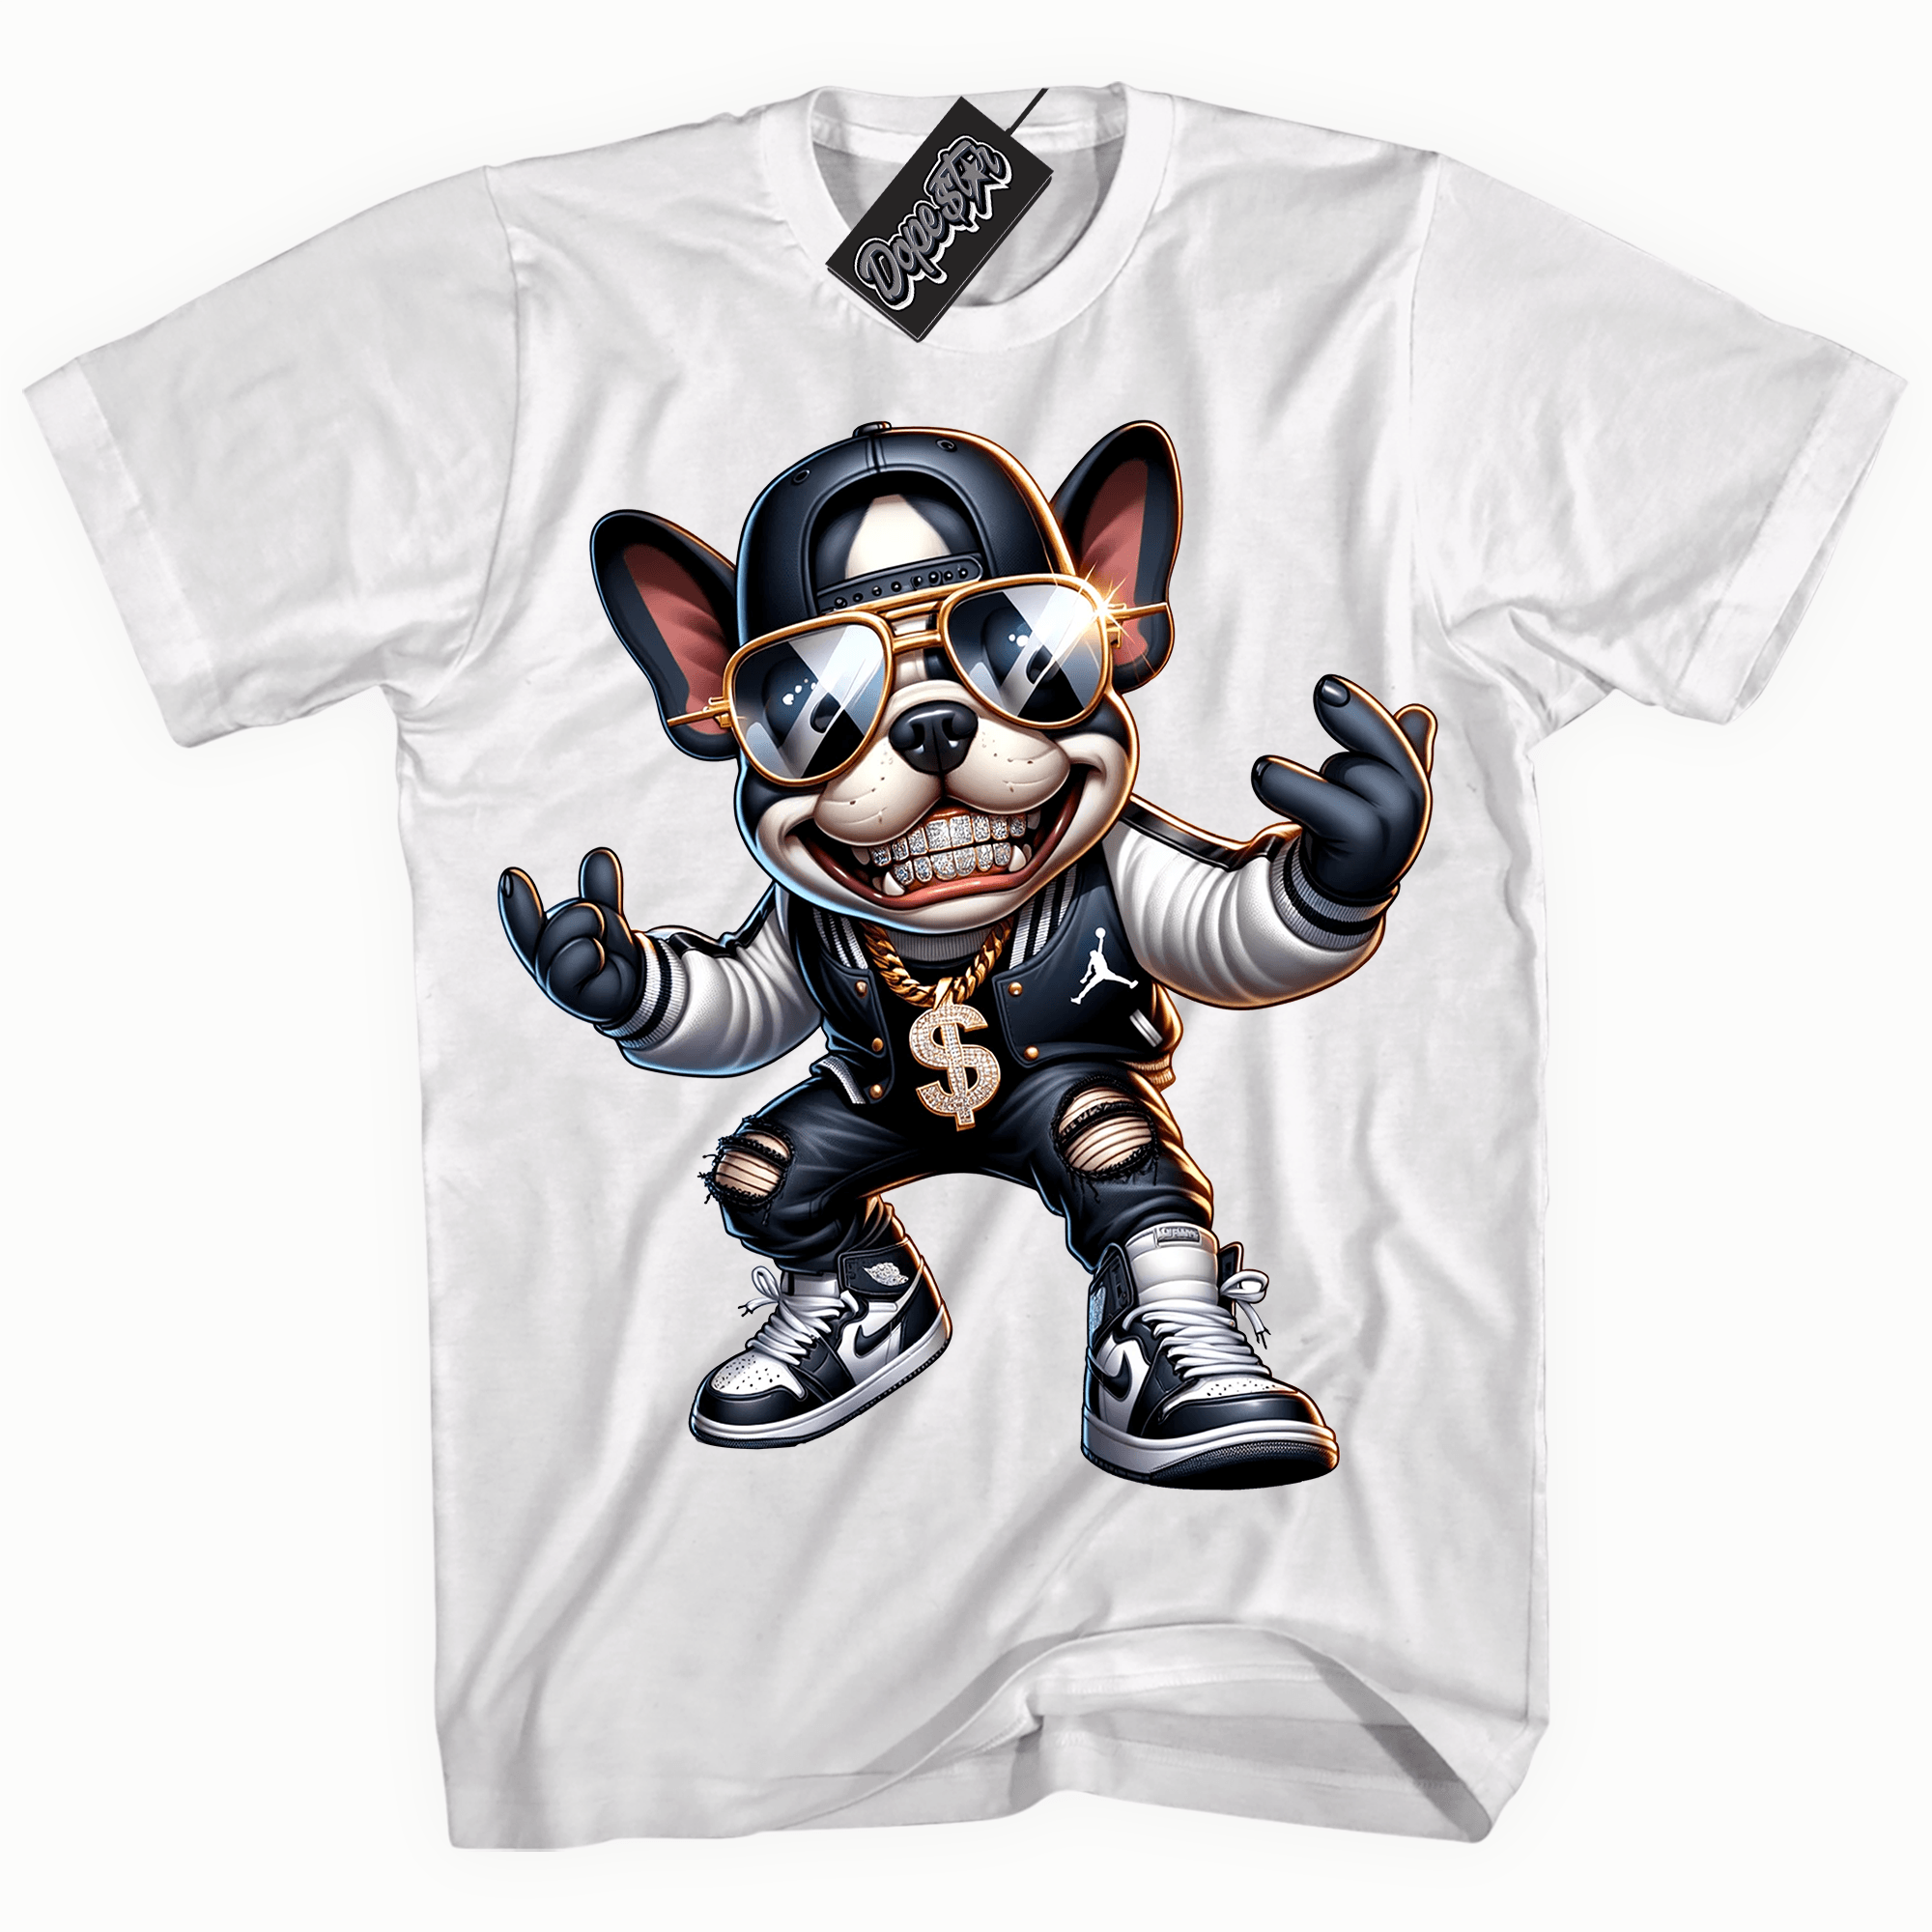 Cool White Shirt With Frenchie OG design That Perfectly Matches Air Jordan 1 Retro High OG Black And White Sneakers.